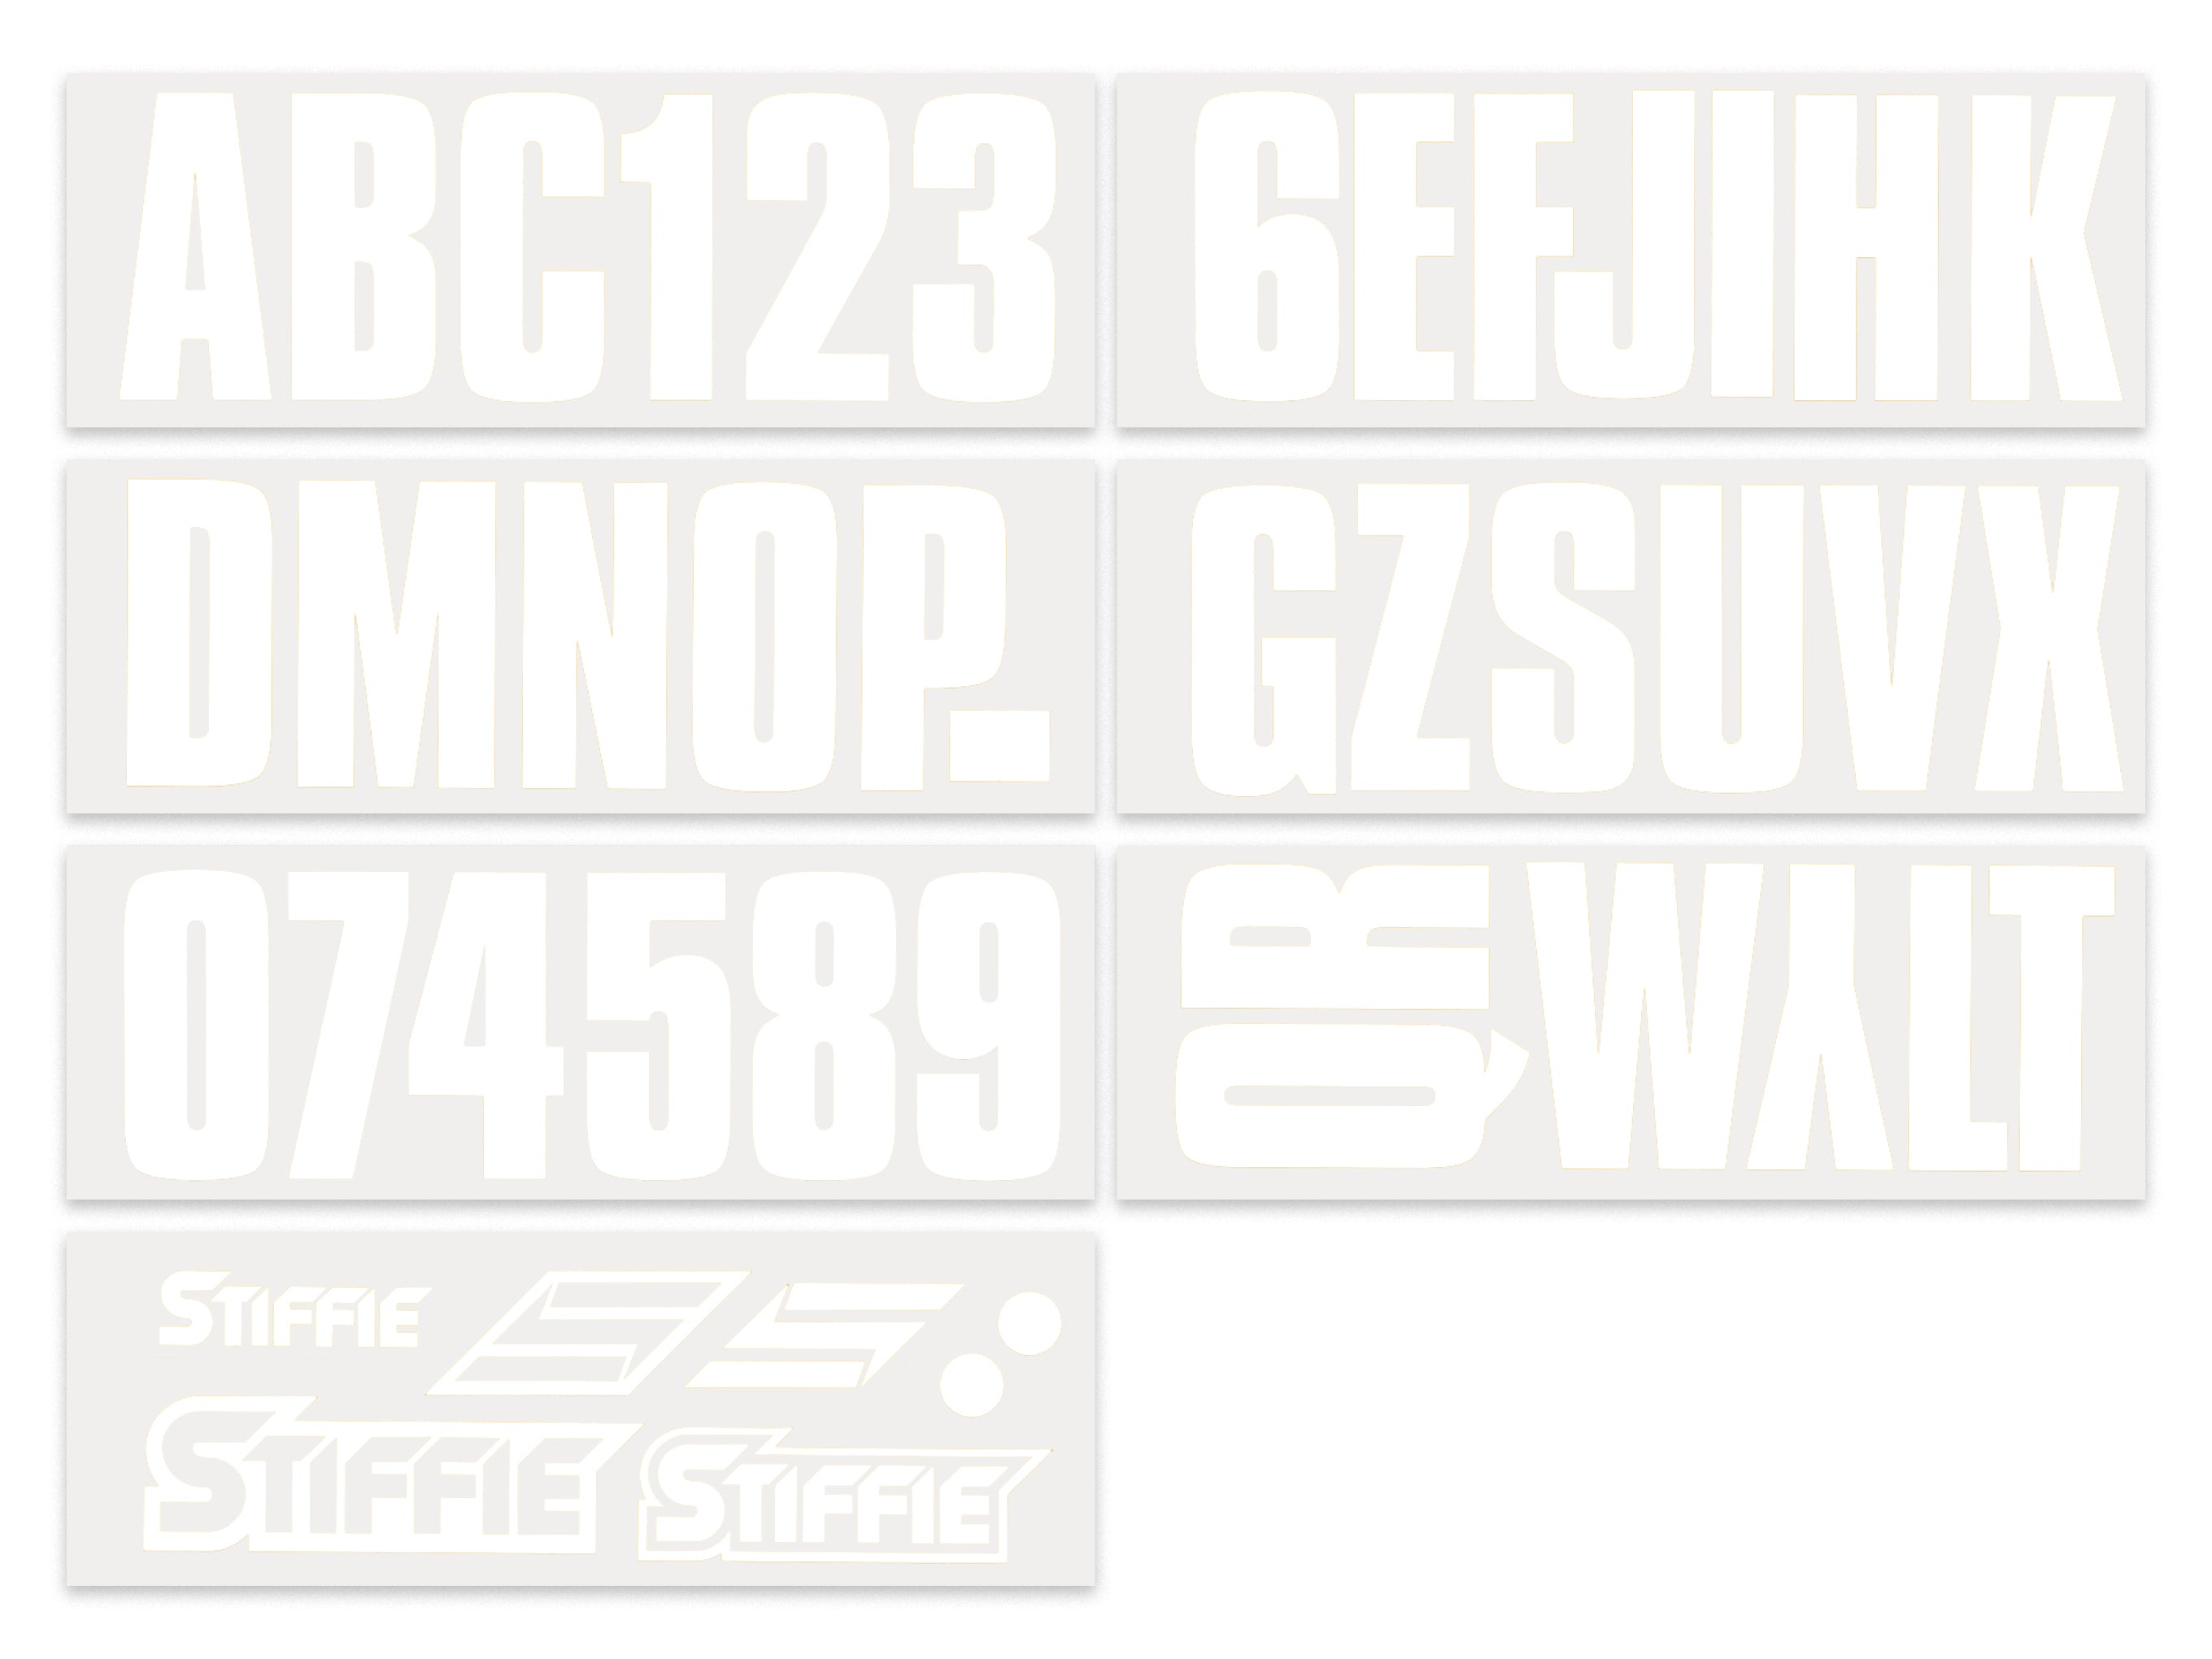 STIFFIE Uniline White 3" ID Kit Alpha-Numeric Registration Identification Numbers Stickers Decals for Boats & Personal Watercraft